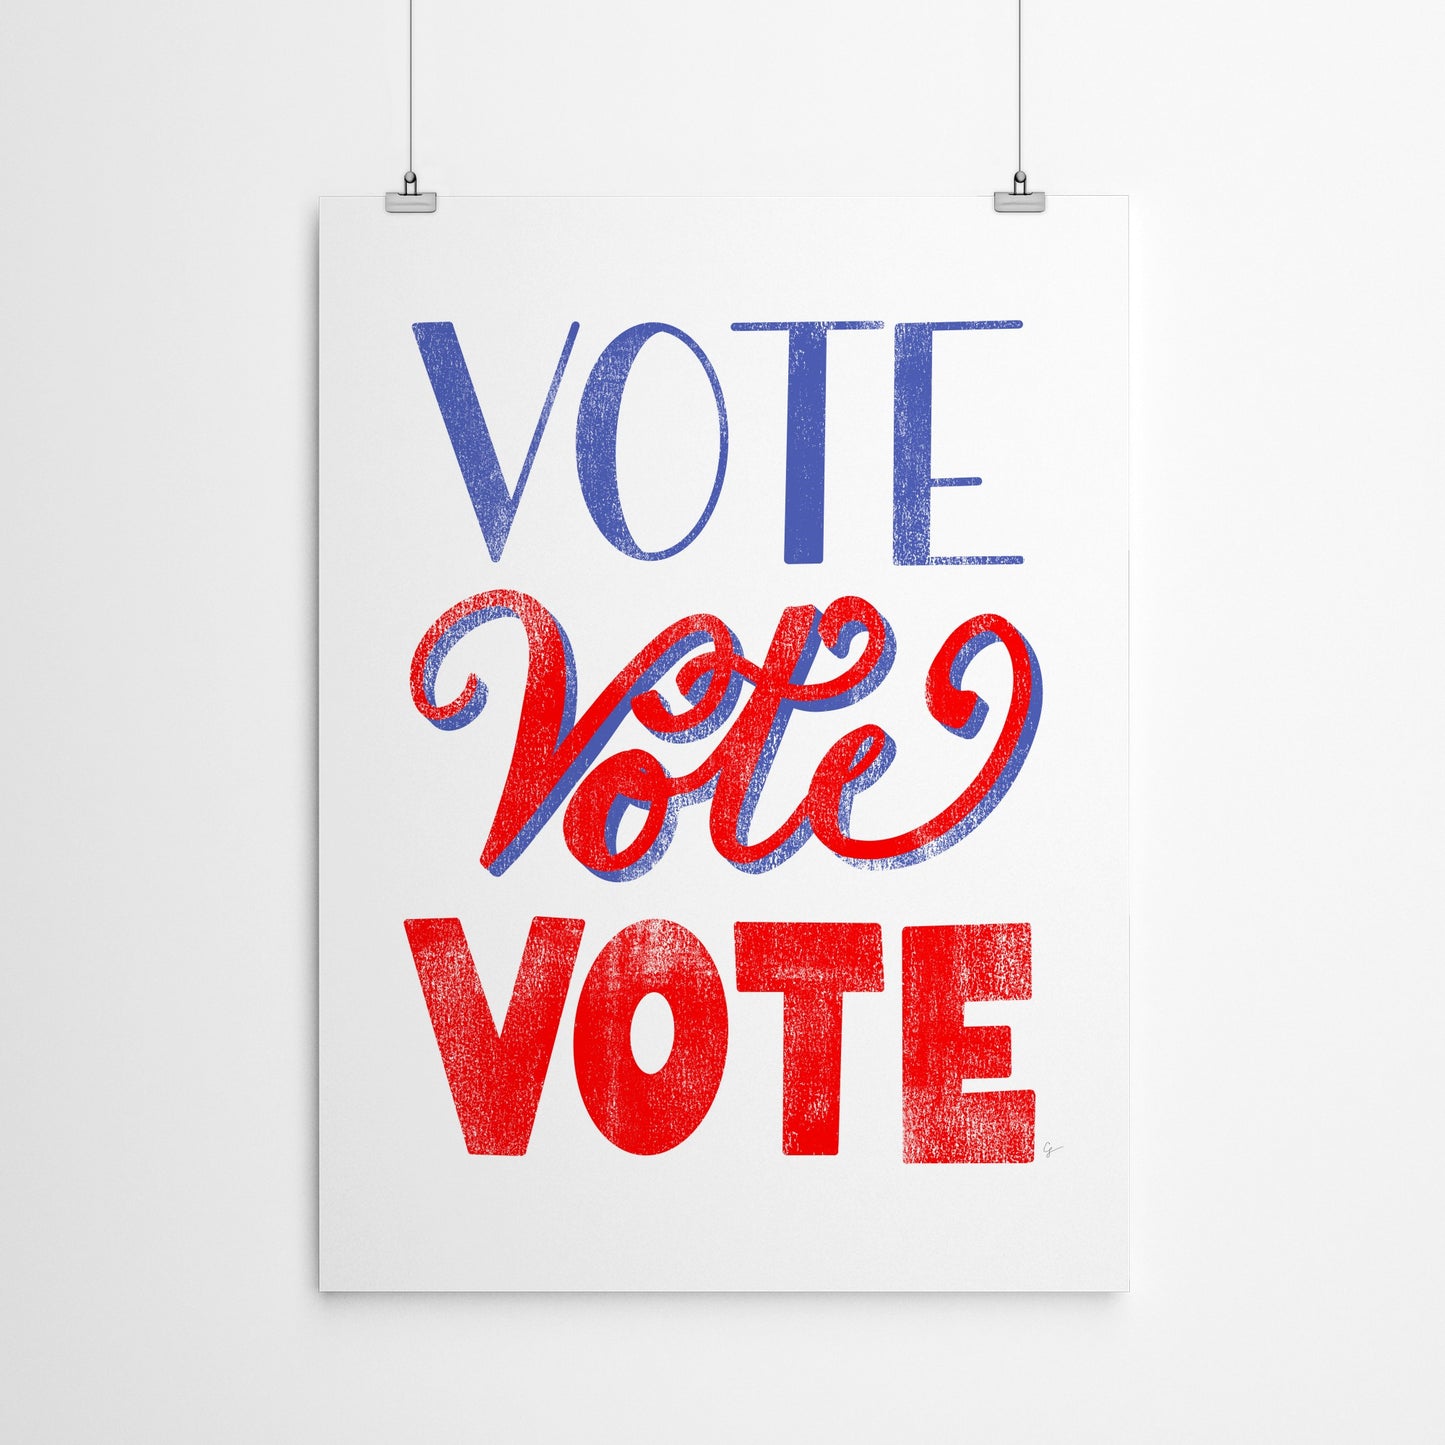 Vote by Lyman Creative Co - Poster - Art Print - Americanflat